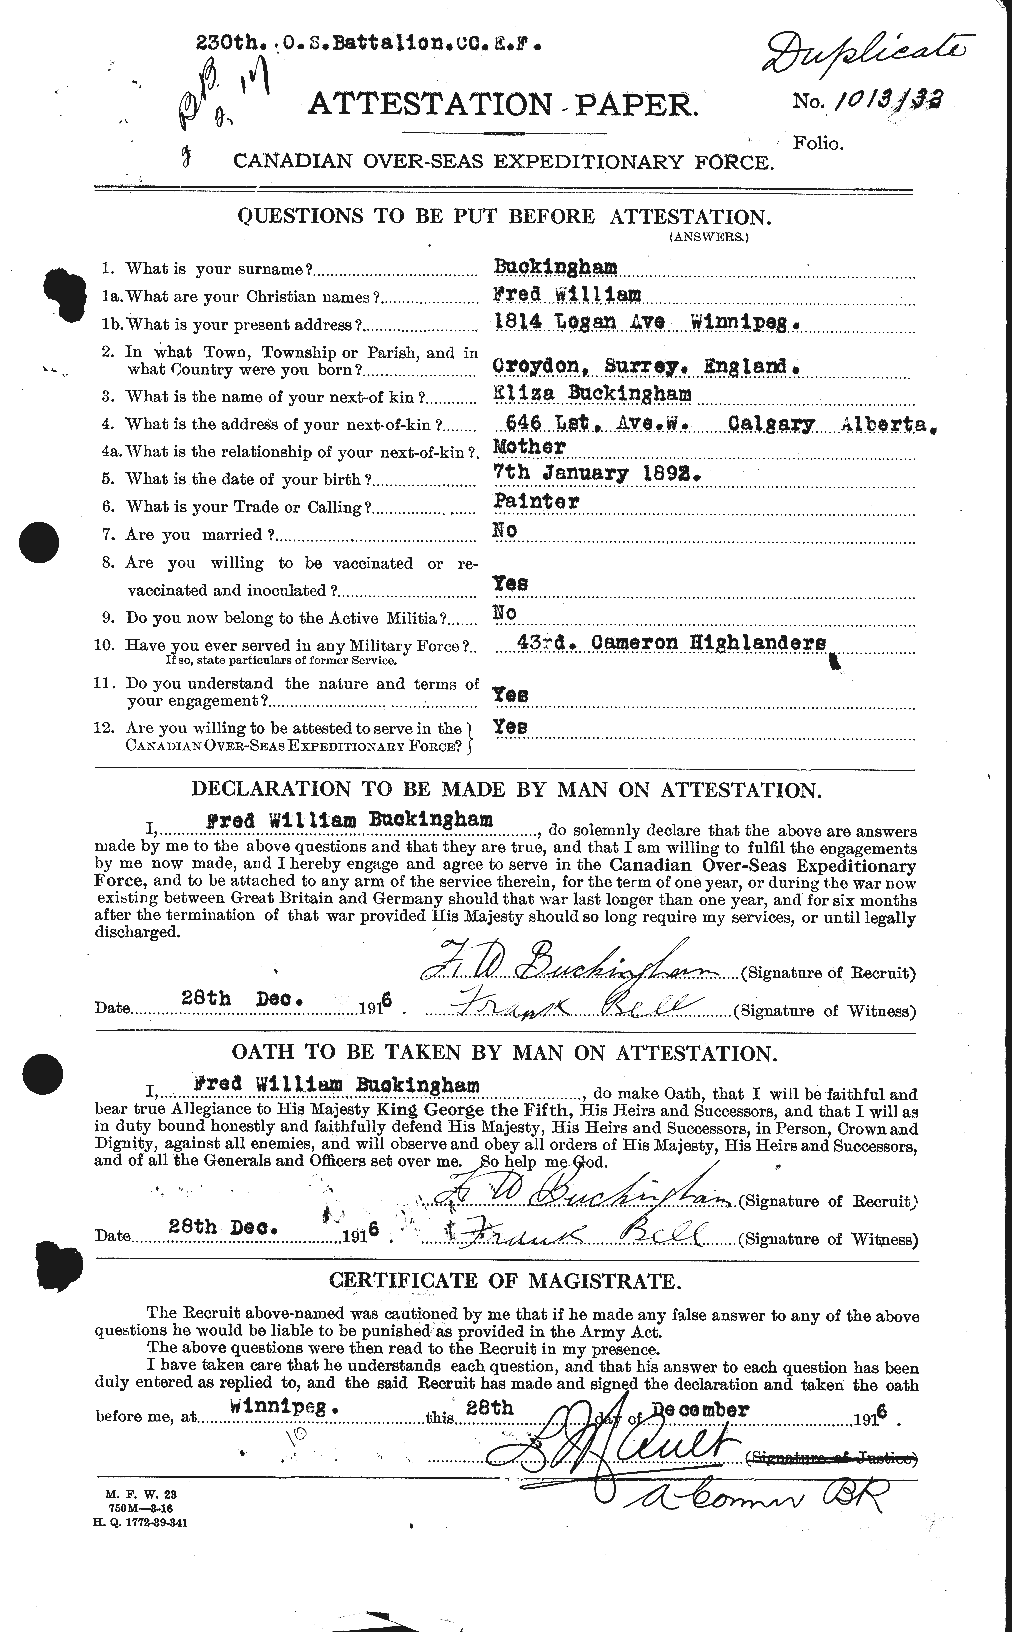 Personnel Records of the First World War - CEF 269437a